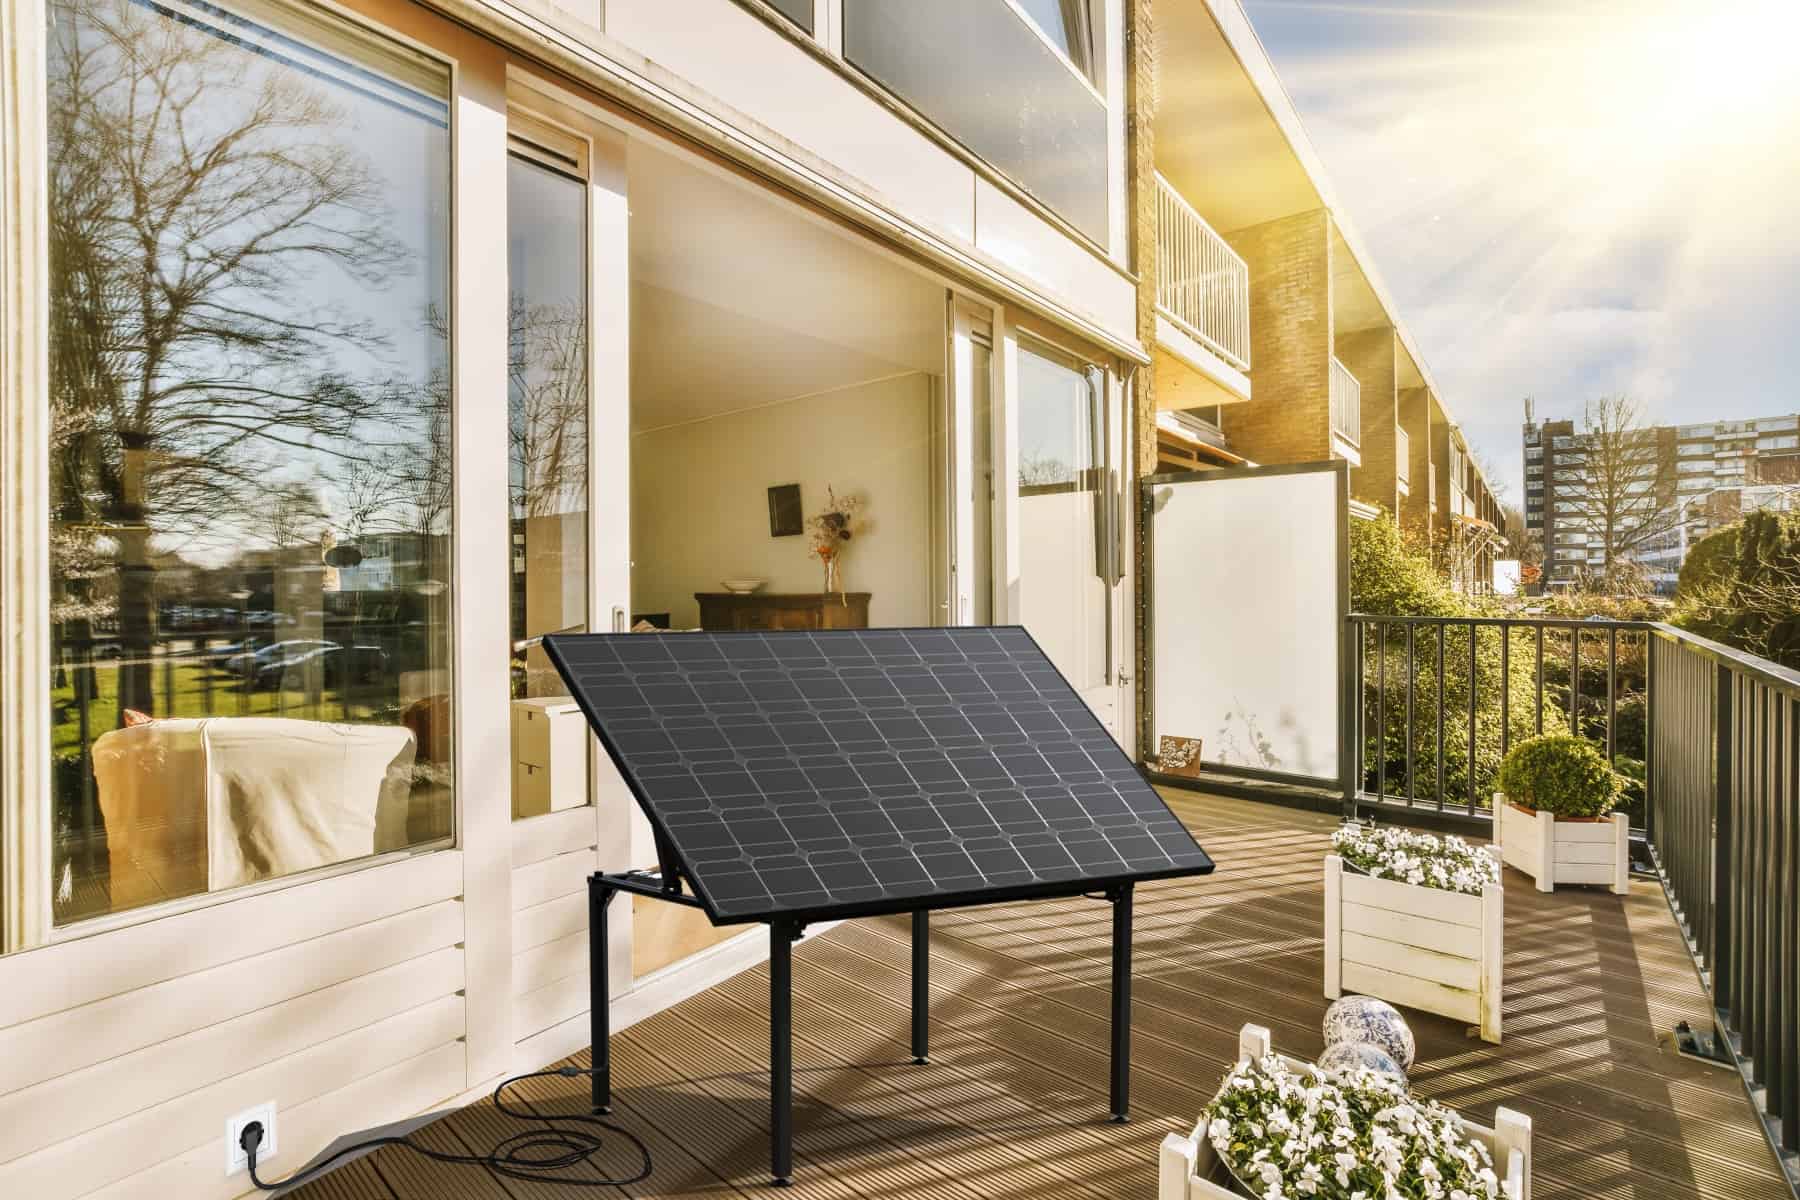 Technaxx Solar Table Power Plant Announced at IFA 2023 – A 410W solar panel integrated into a table priced at €830